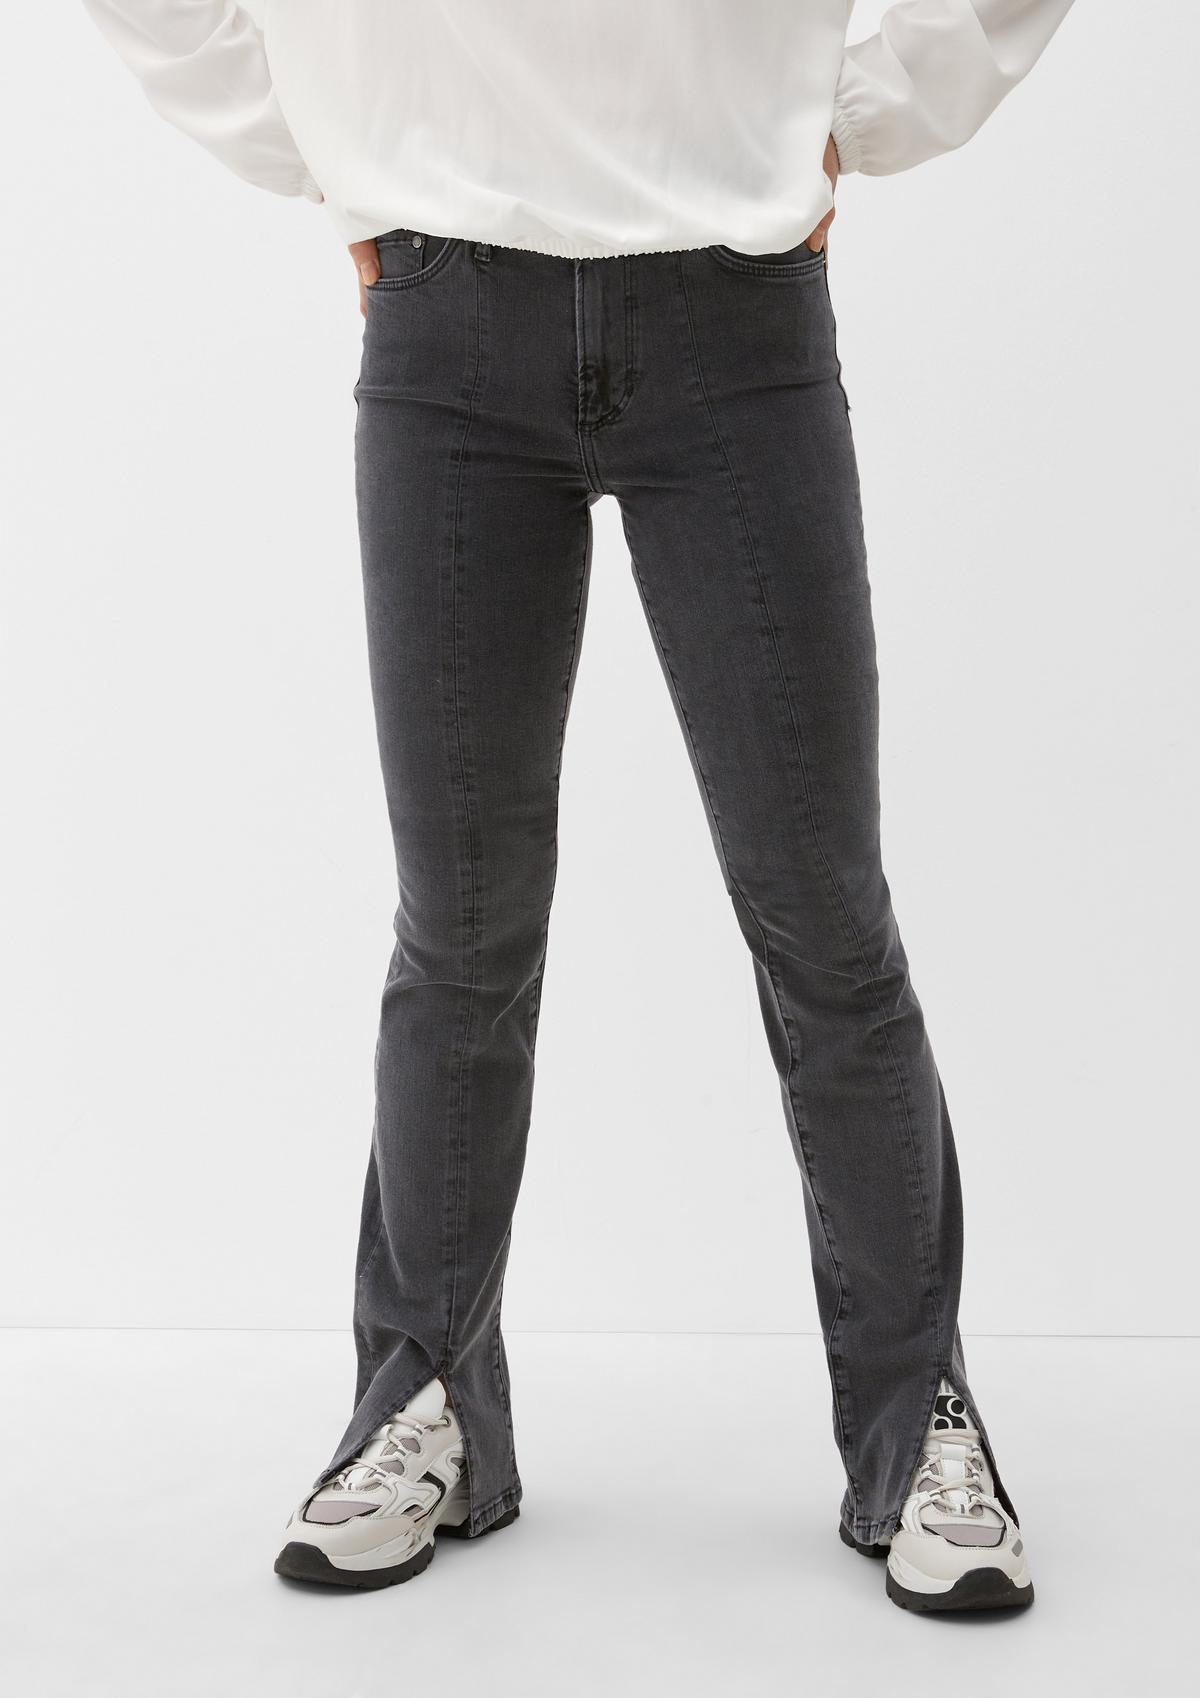 s.Oliver Jeans Beverly / Slim Fit / High Rise / Bootcut Leg 